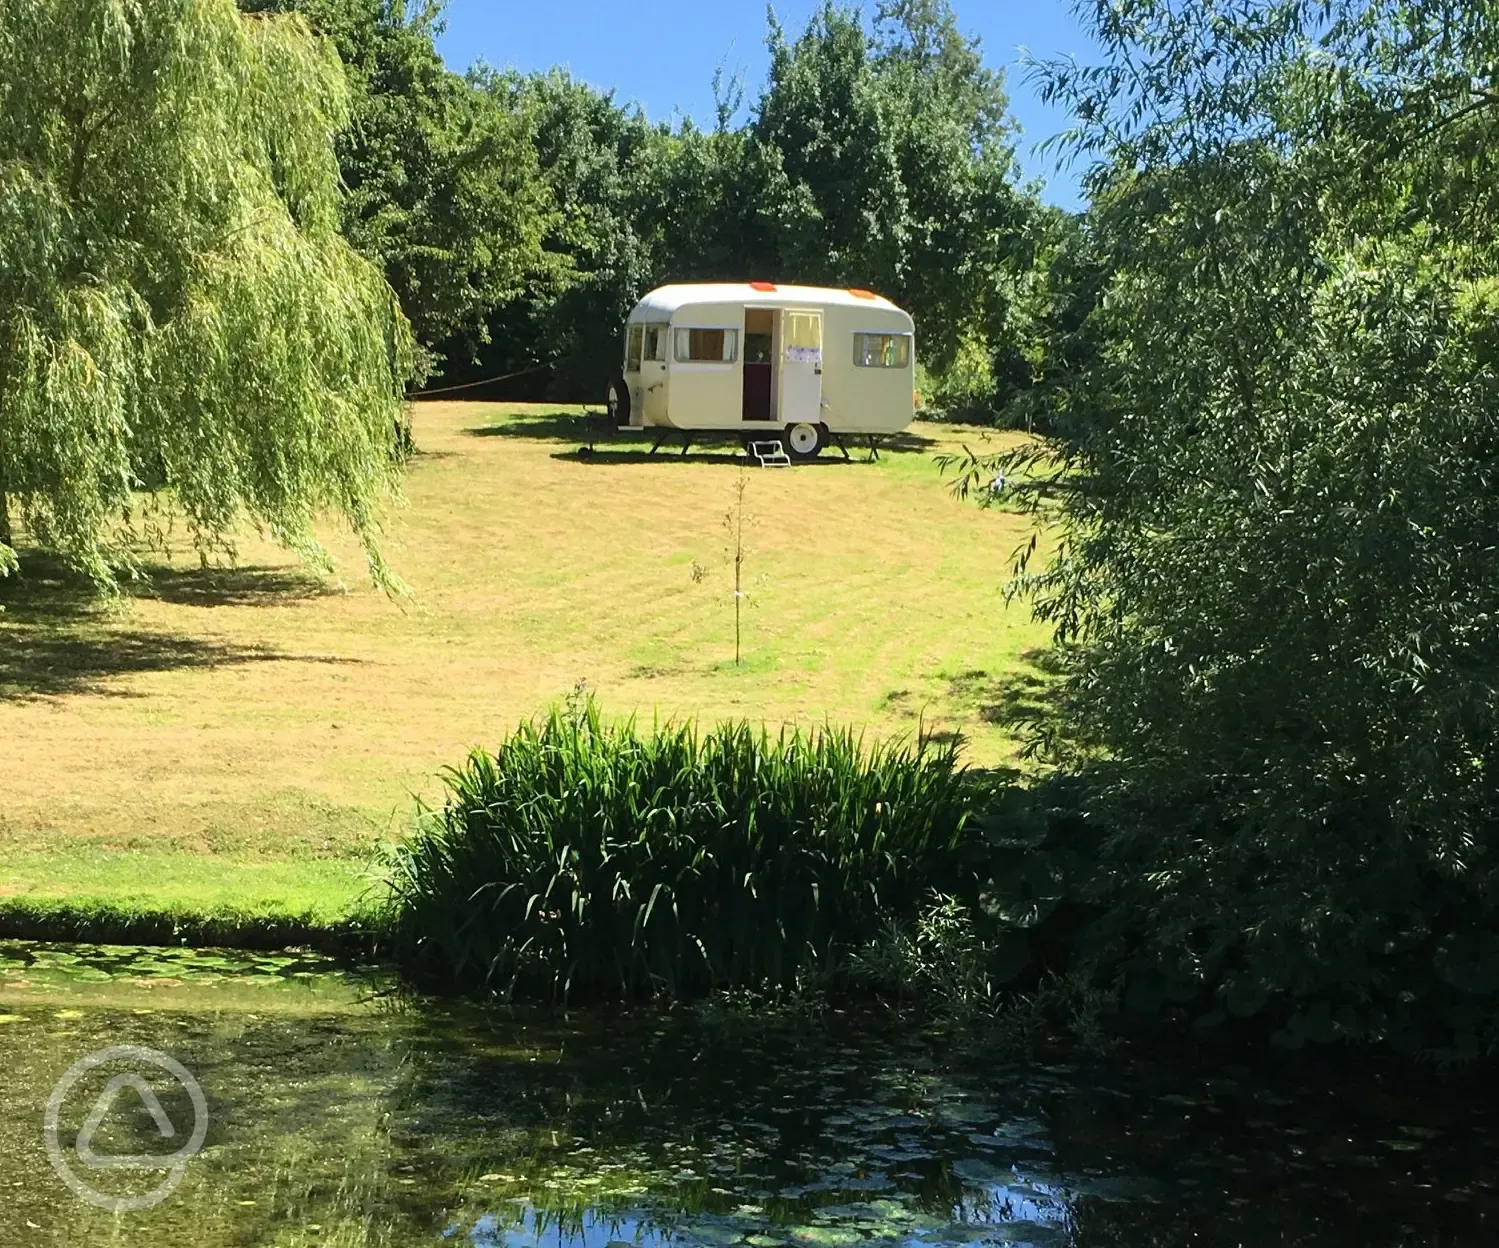 Glamping caravan on site at Daphne's Orchard